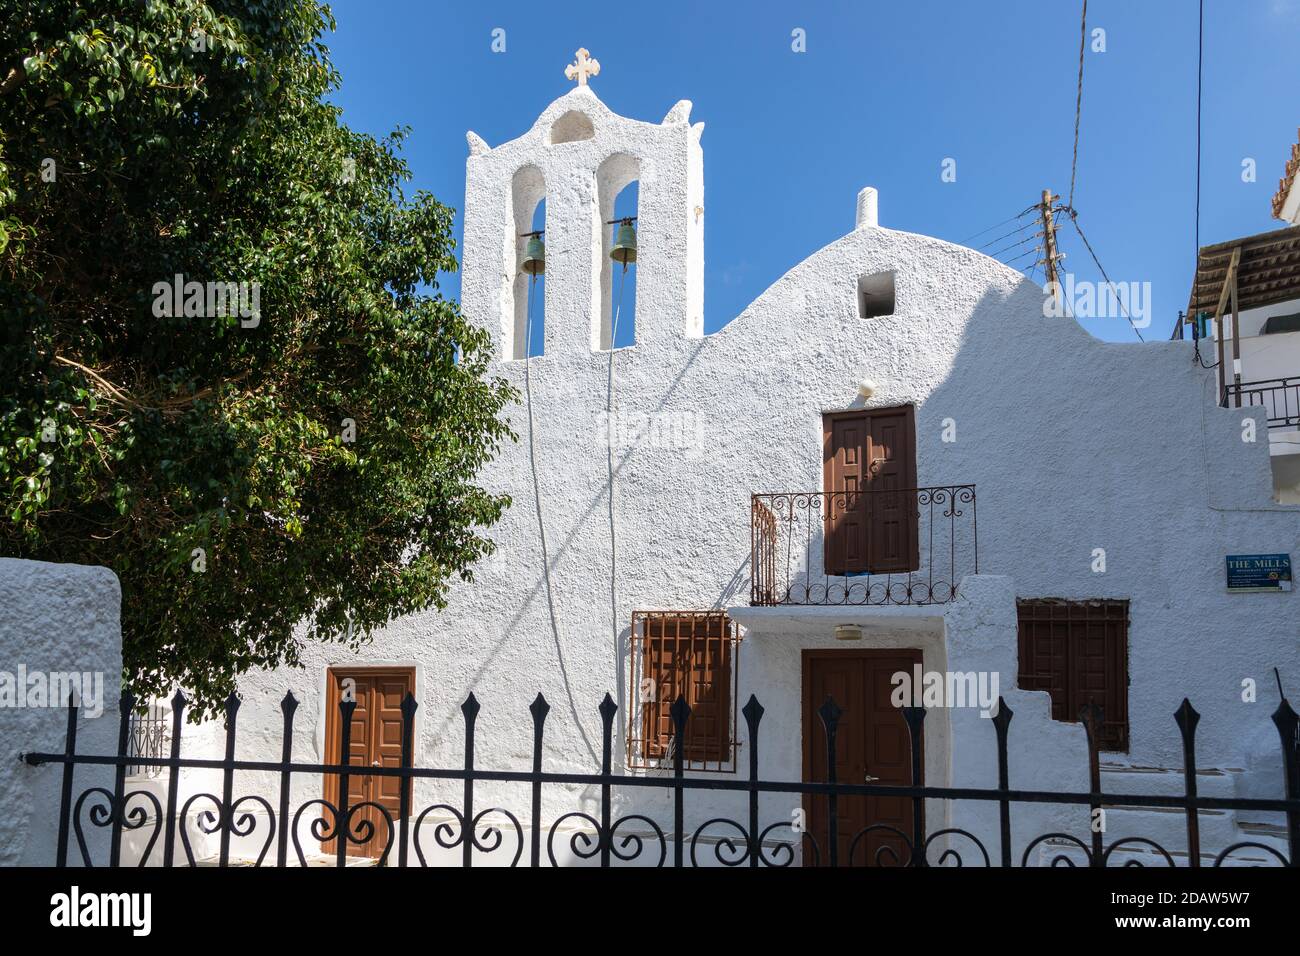 Chora, Ios Island, Greece- 20 September 2020: View of the church in the old town. The facade of the building and the characteristic belfry. Stock Photo